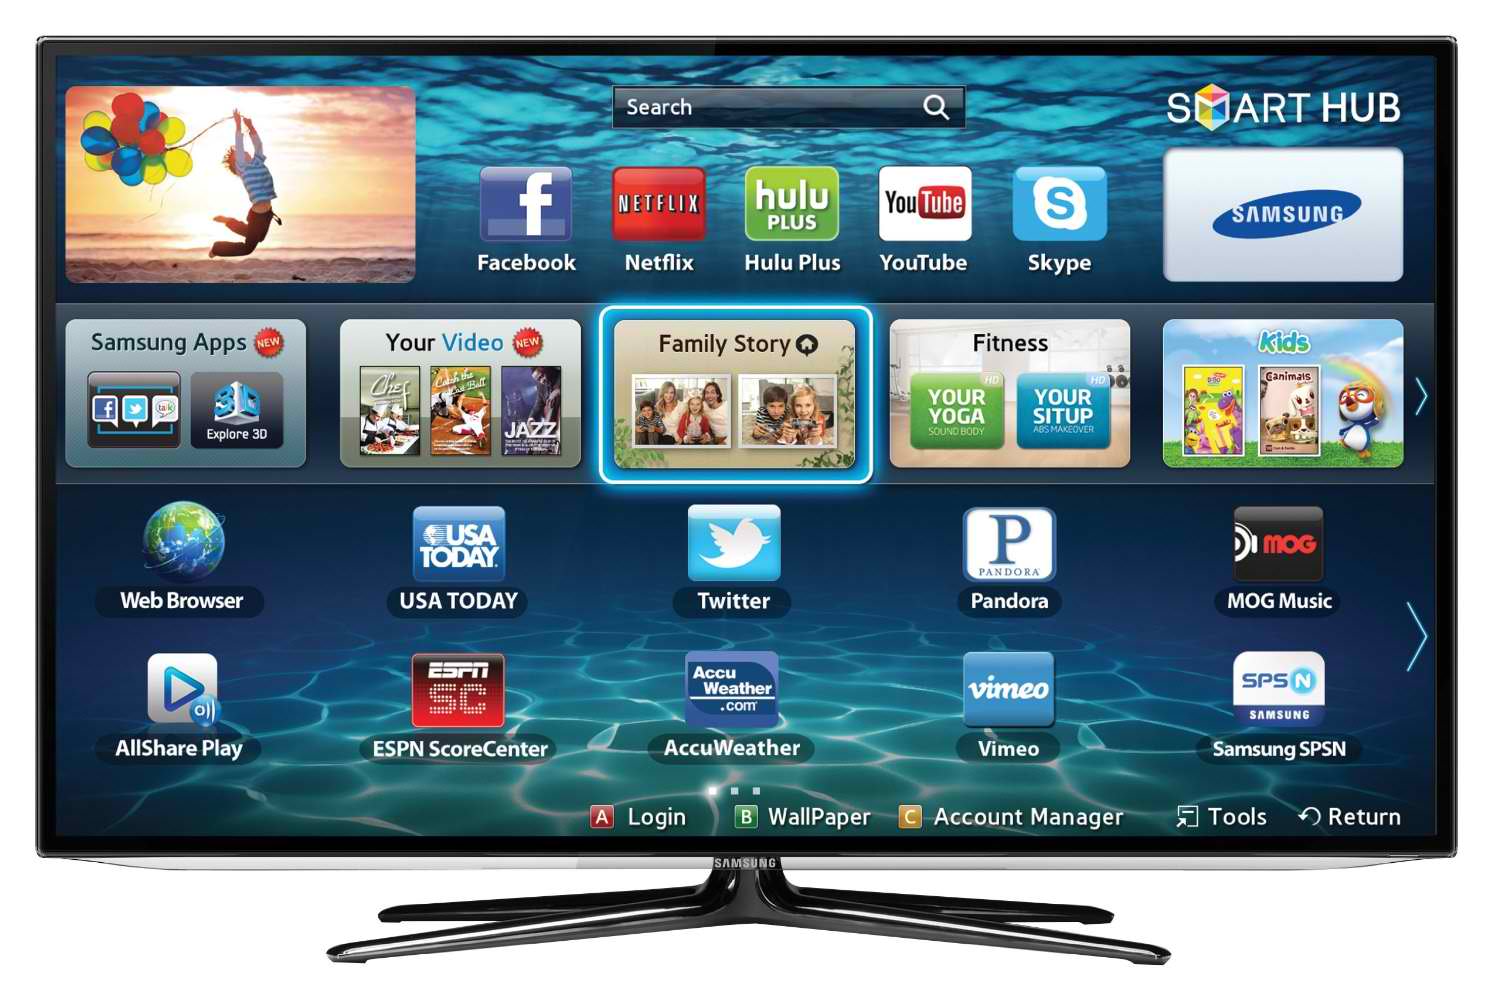 How To Download Apps On My Samsung Smart Tv